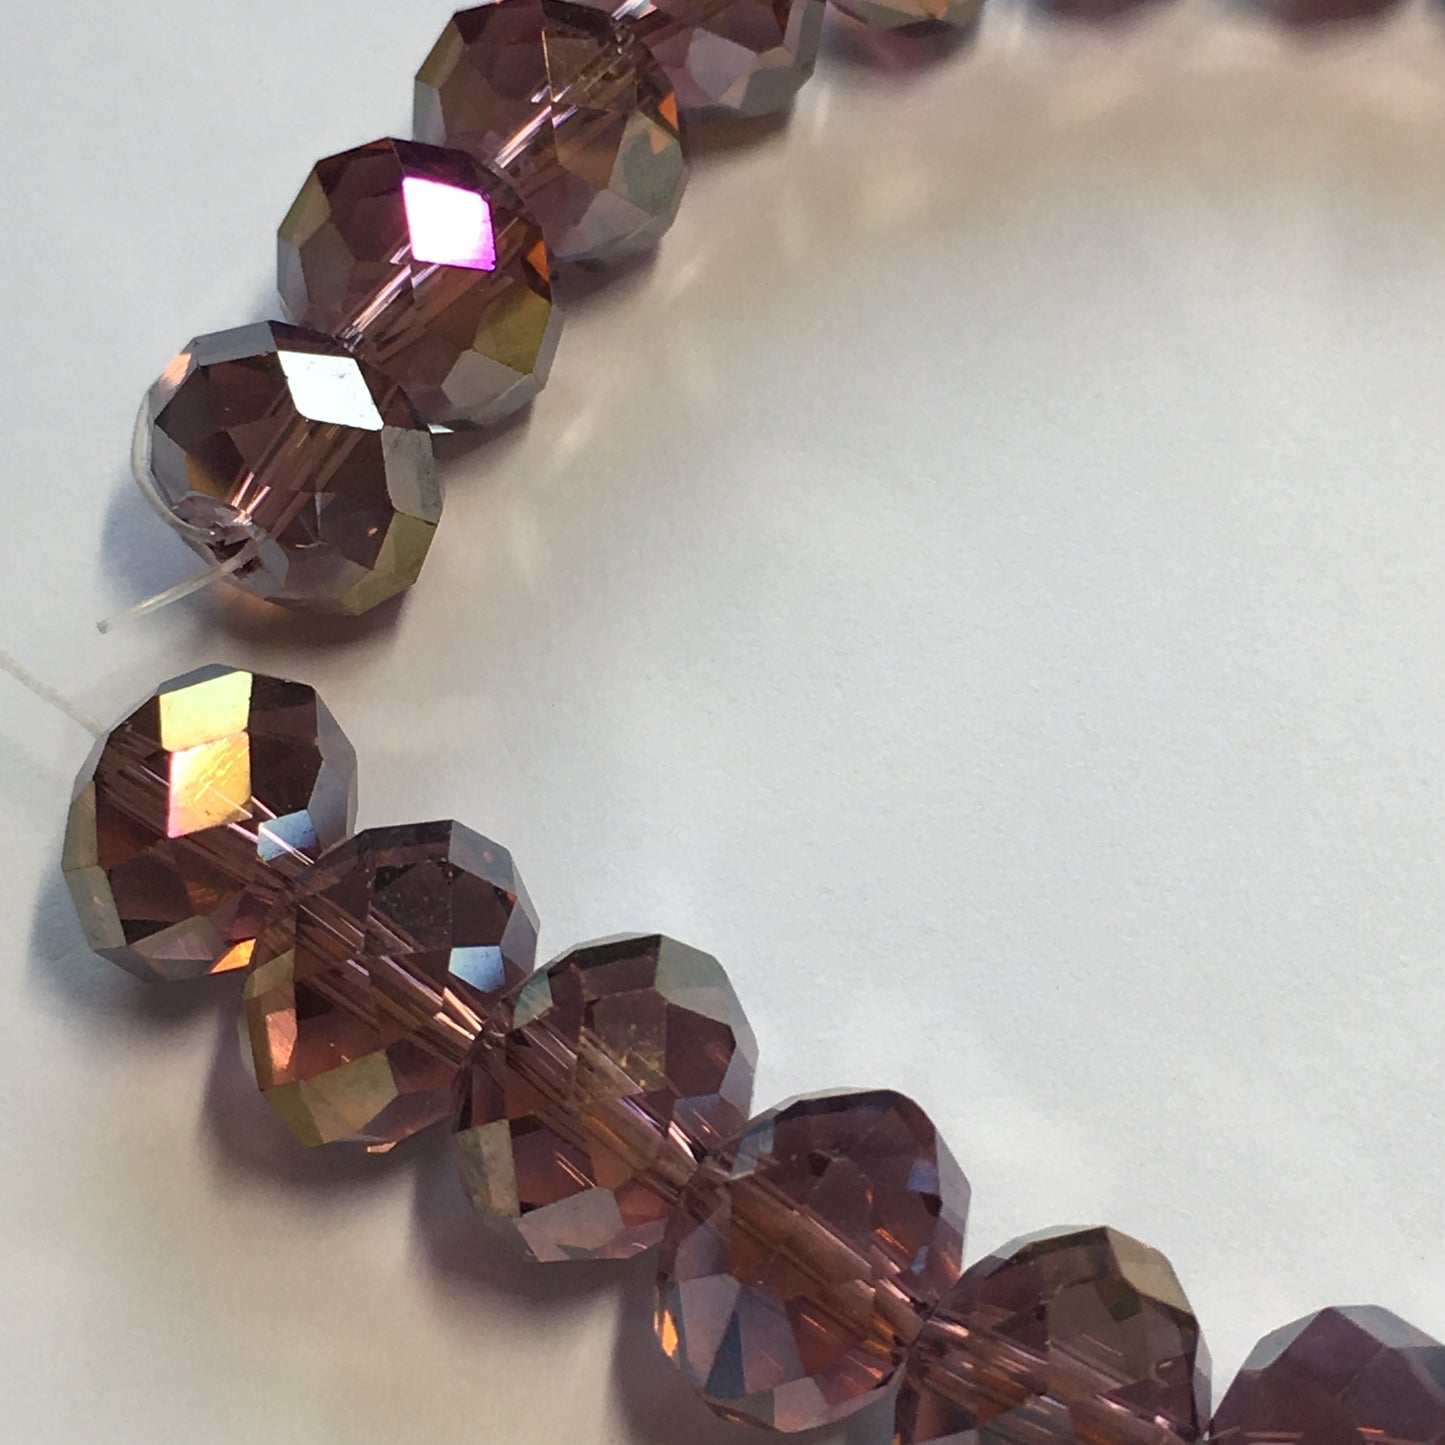 Czech Amethyst / Purple Luster Faceted Rondelle Glass Beads, 12 mm - 23 Beads